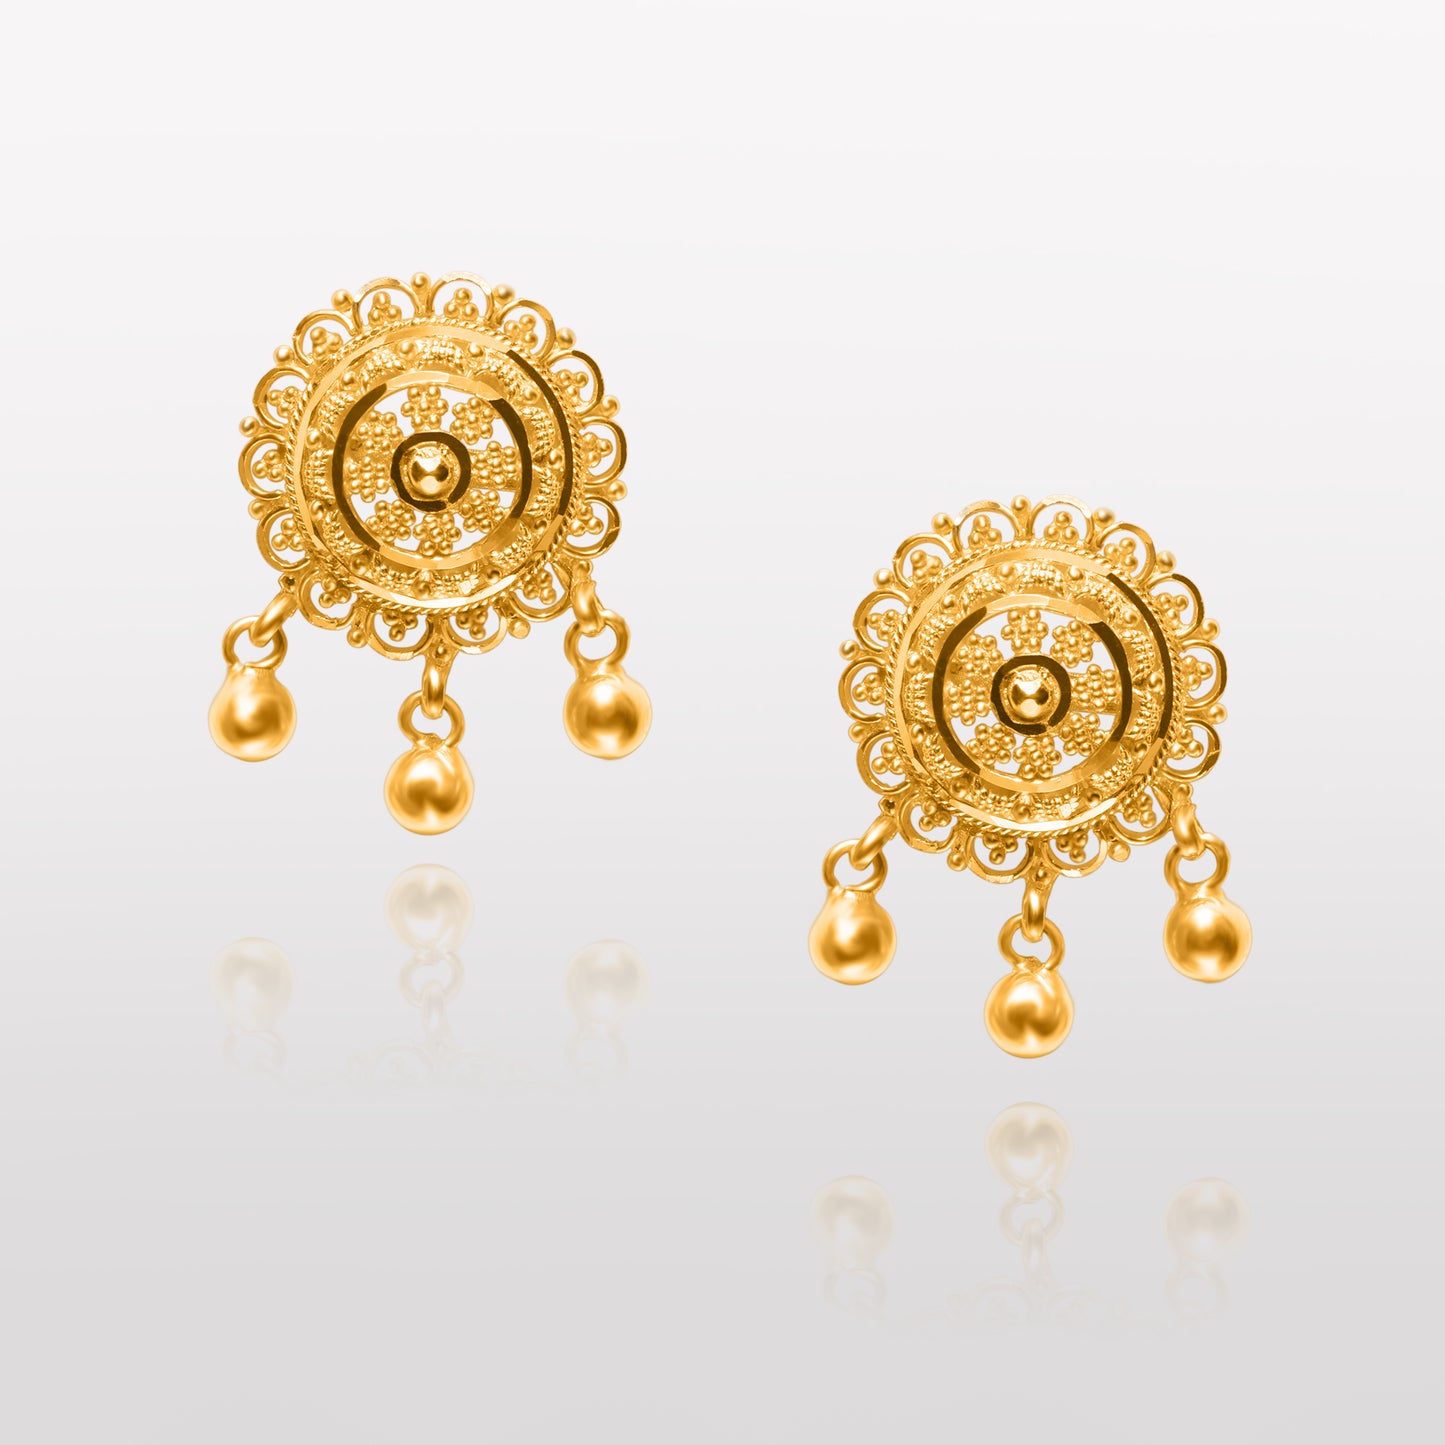 <img src="maya-mini-stud-earrings.jpg" alt="Maya Mini Stud Earrings in 22k Gold - a close-up view of exquisitely designed stud earrings in 22k gold, featuring intricate patterns and delicate details that add a touch of sophistication and charm to any outfit."/>